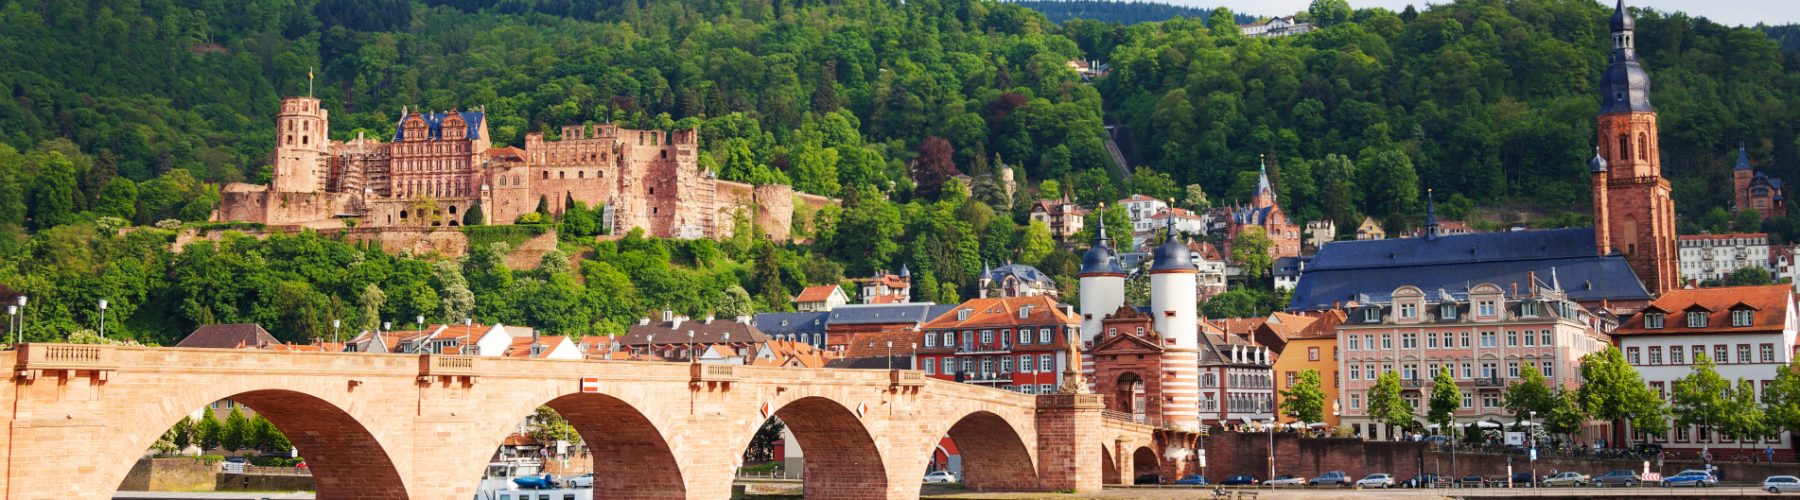 View of the city of Heidelberg on the Neckar River in Germany